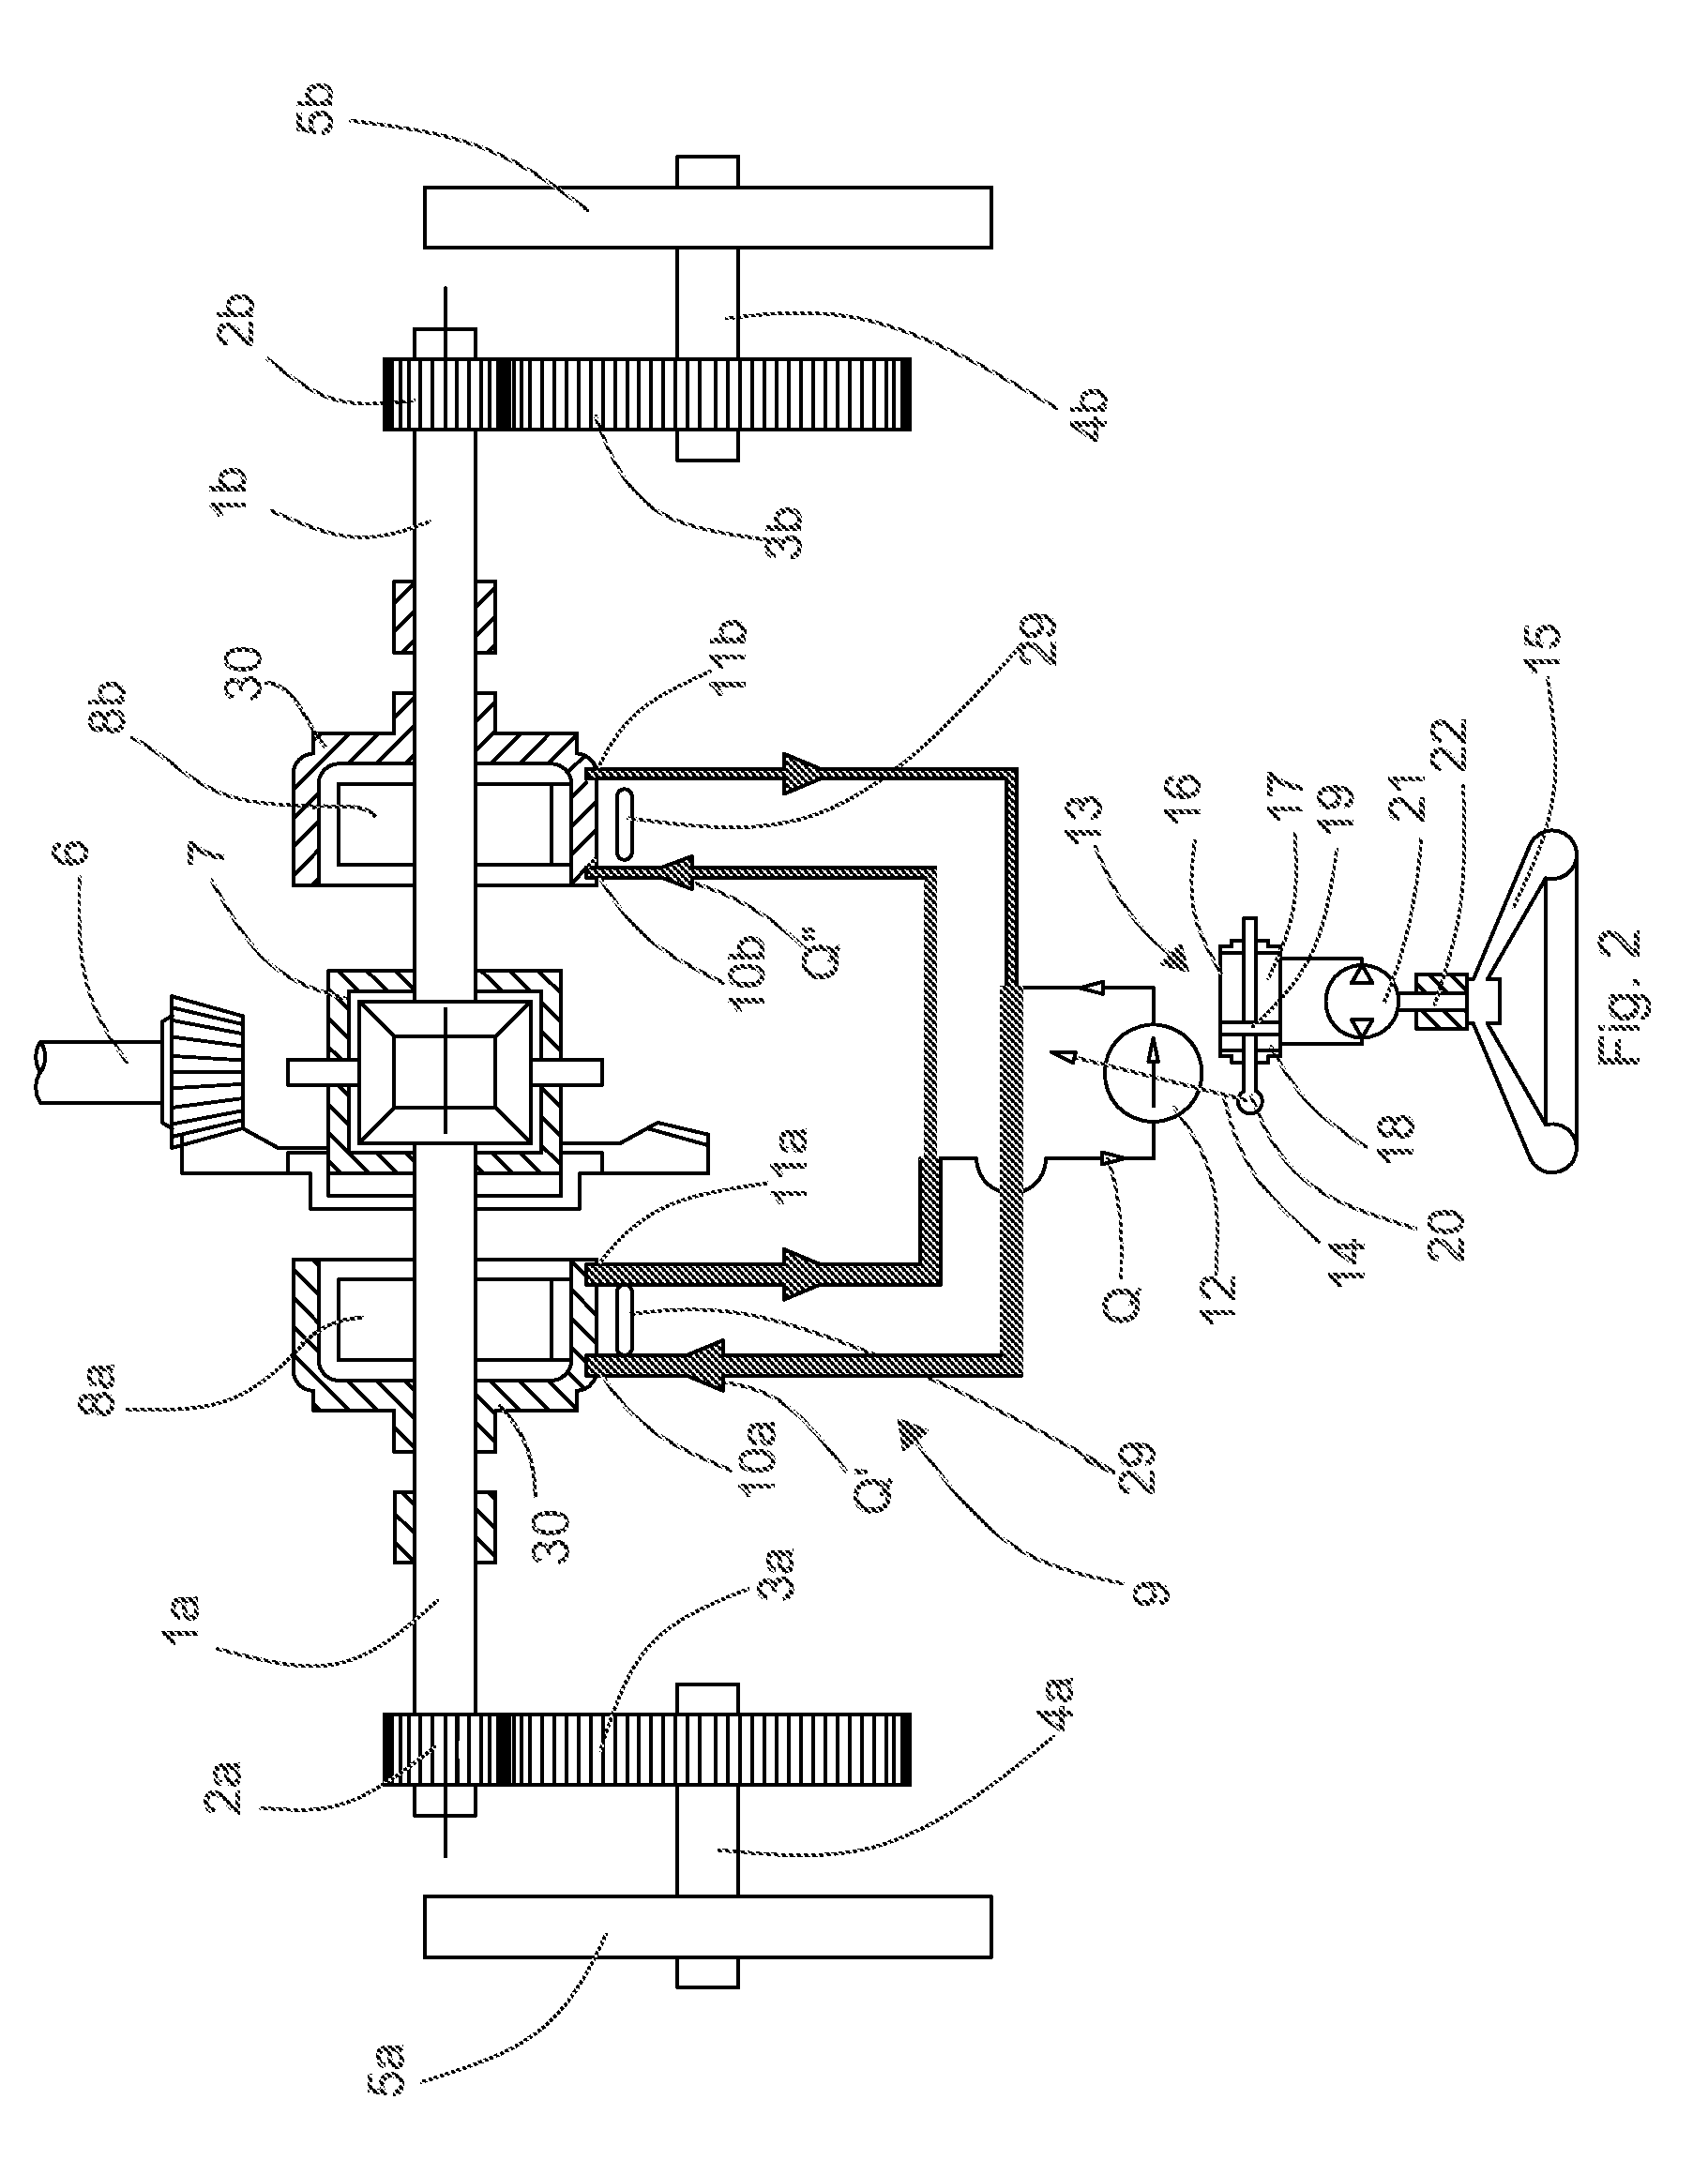 Steering control system